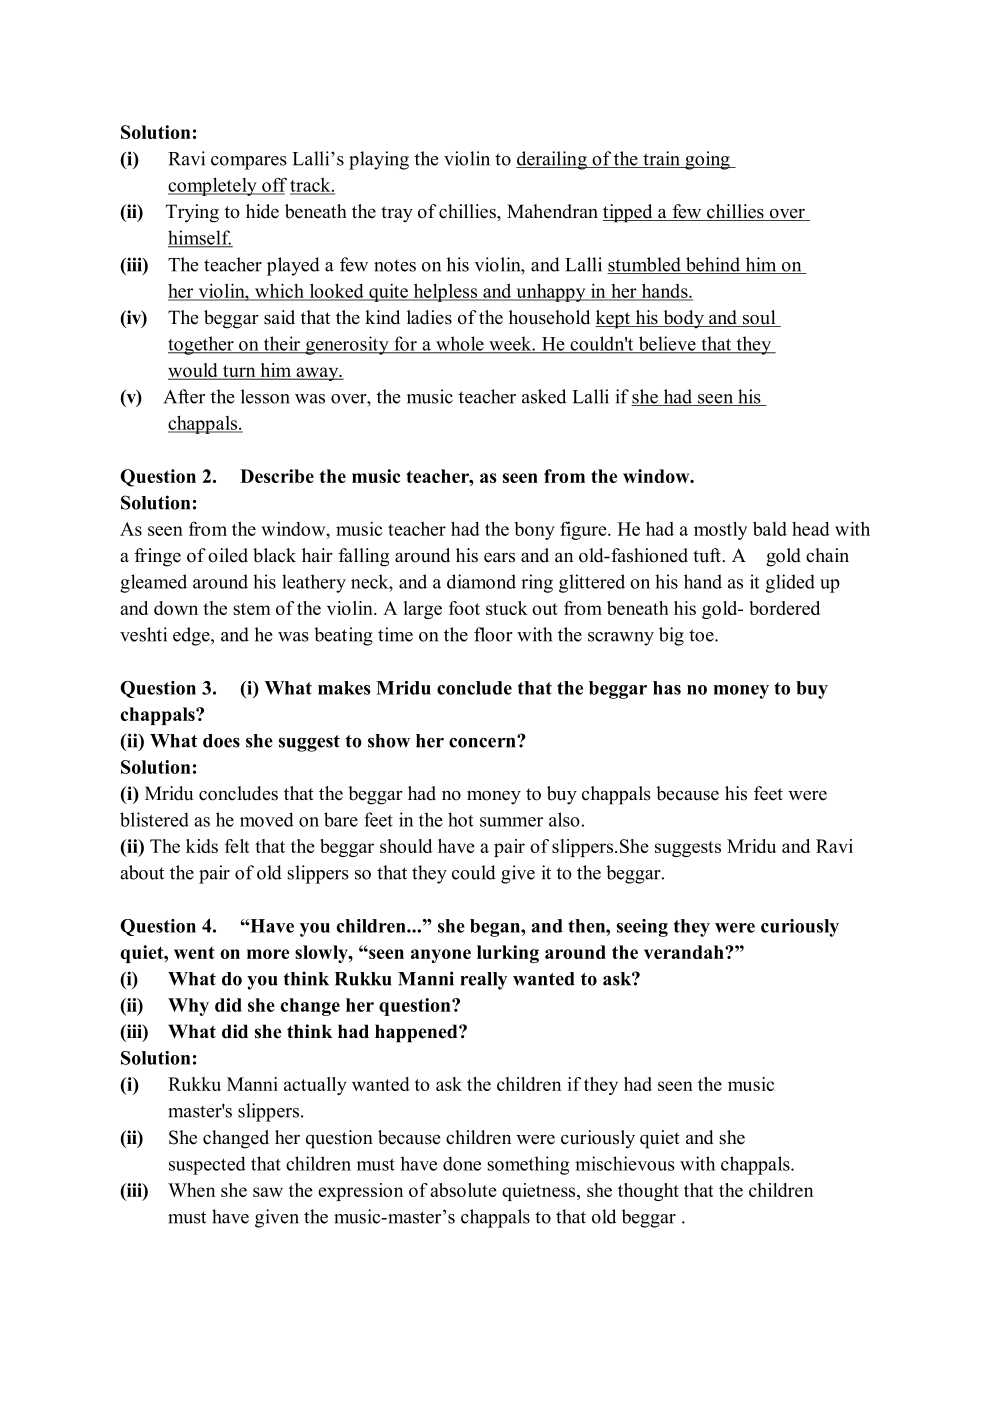 NCERT Solutions For Class 7 English Honeycomb Chapter 2 A Gift of Chappals